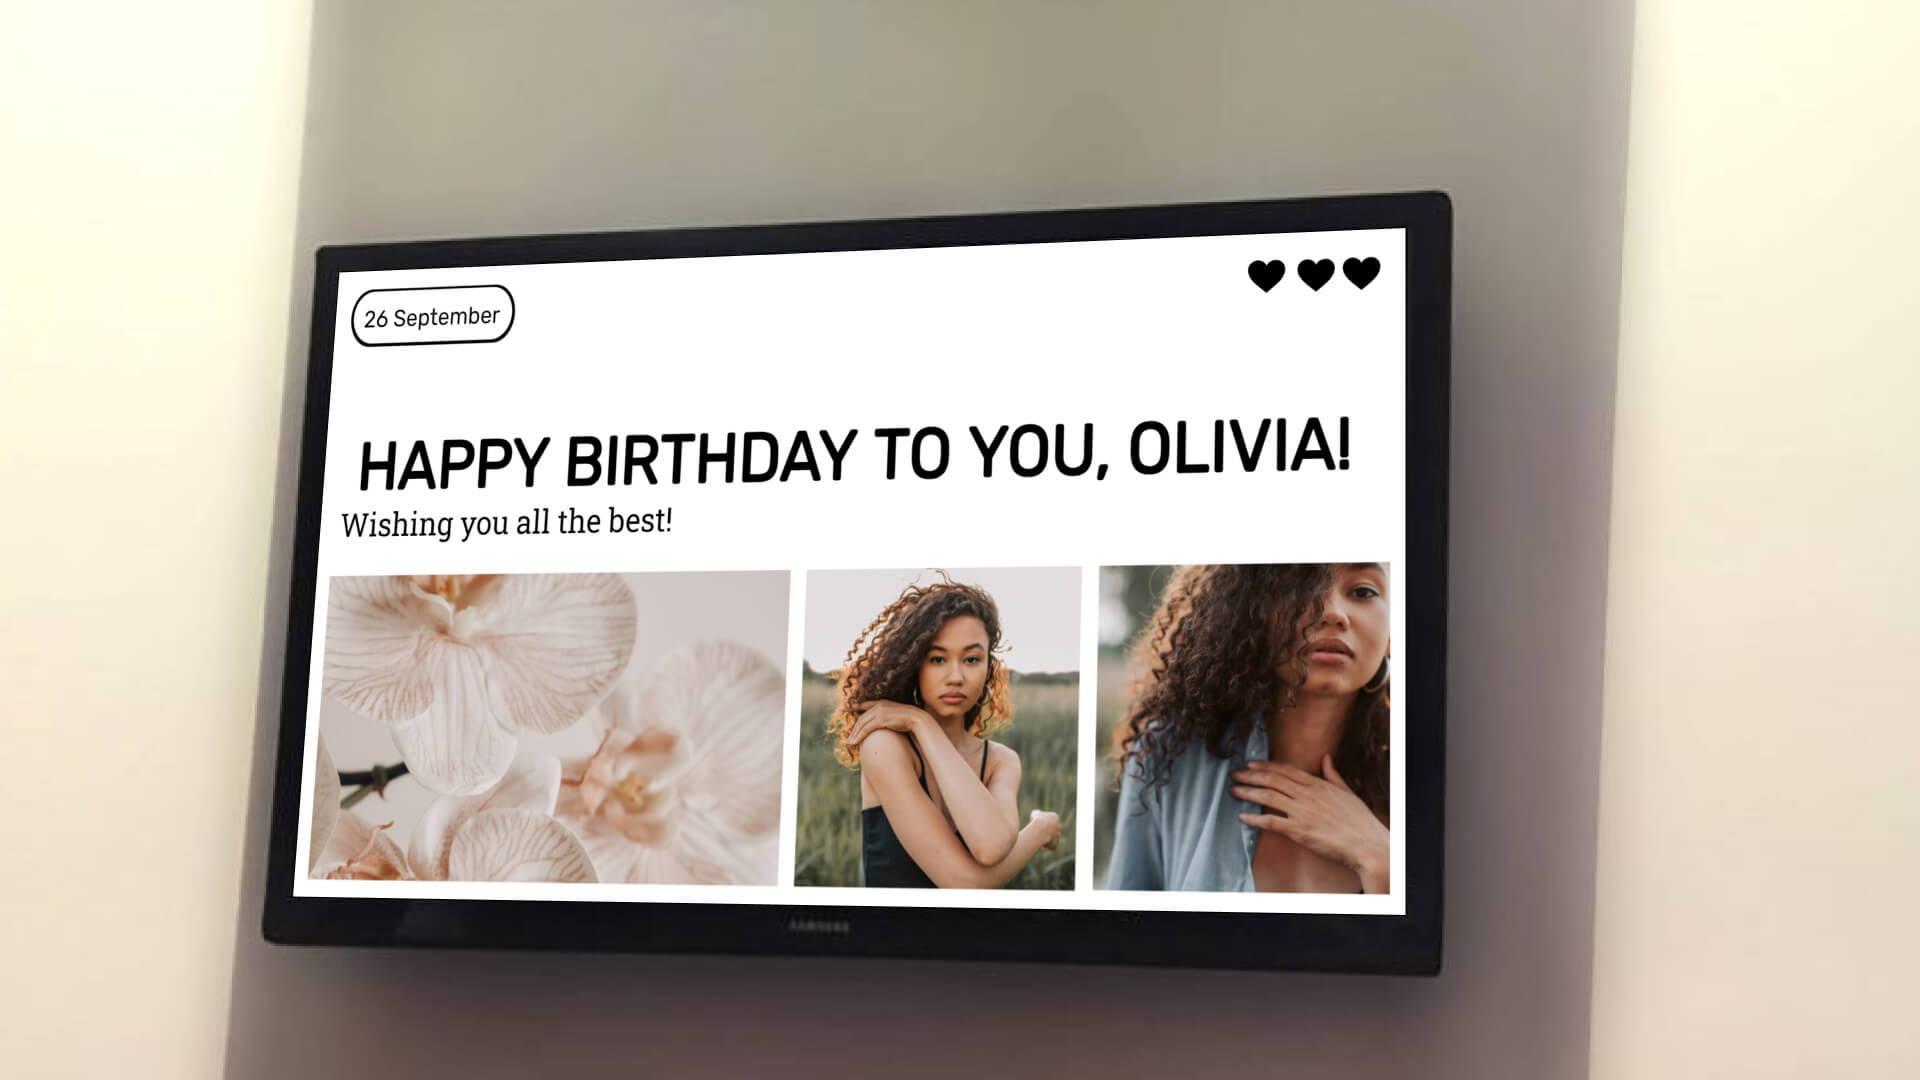 A home digital signage screen showing birthday wishes